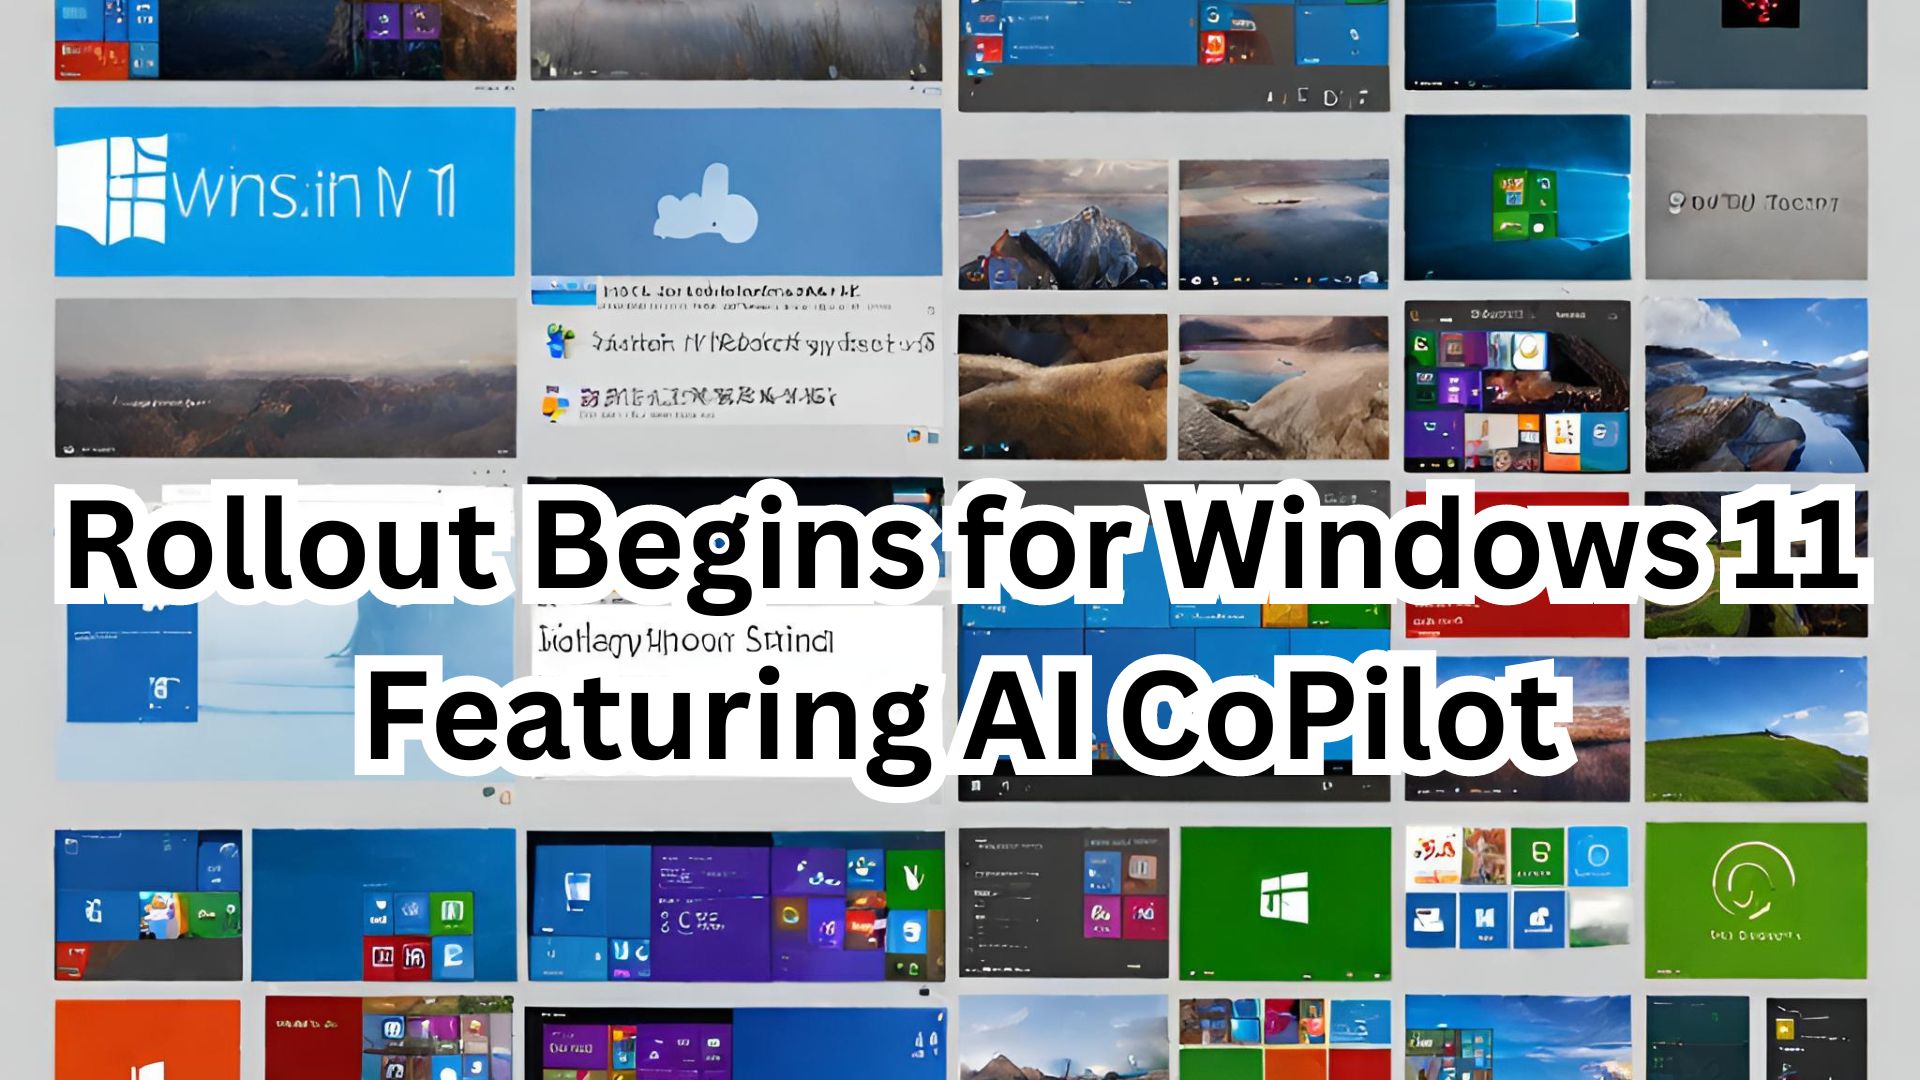 Rollout Begins for Windows 11 Featuring AI CoPilot